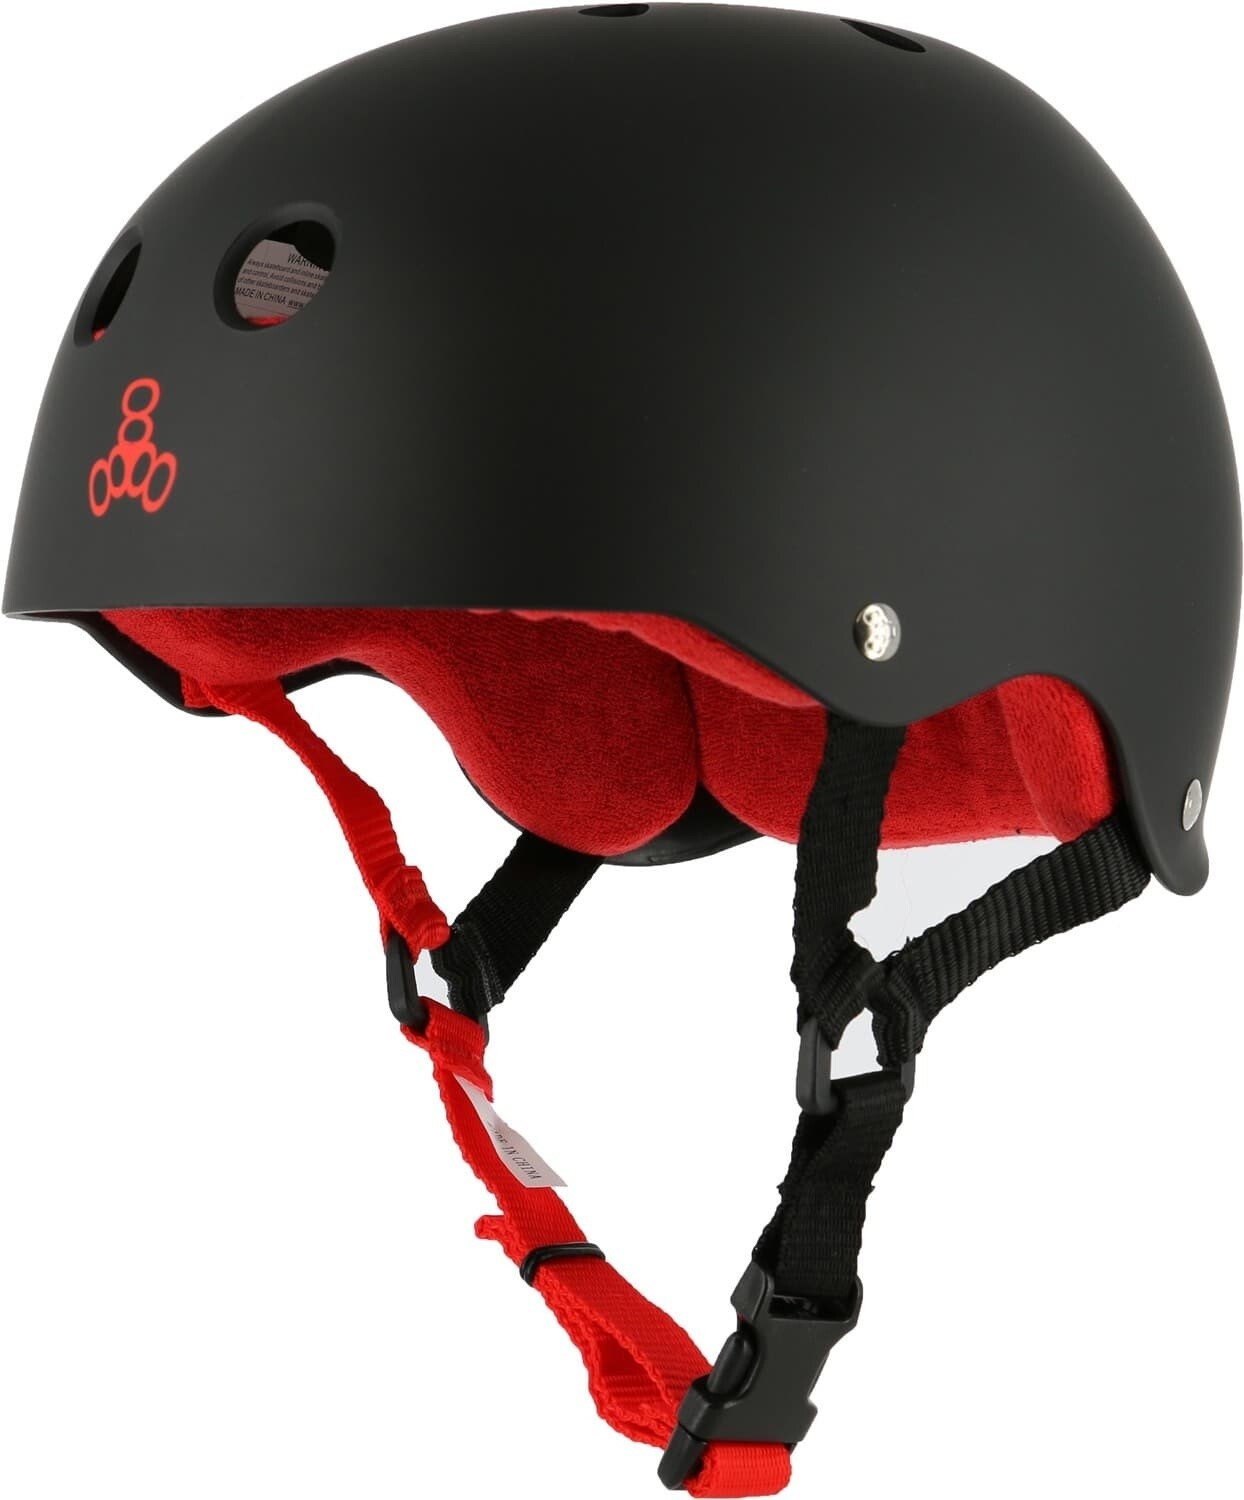 T8 Sweatsaver Helmet Black Red, Color: Black Red Rubber, Size: XSMALL